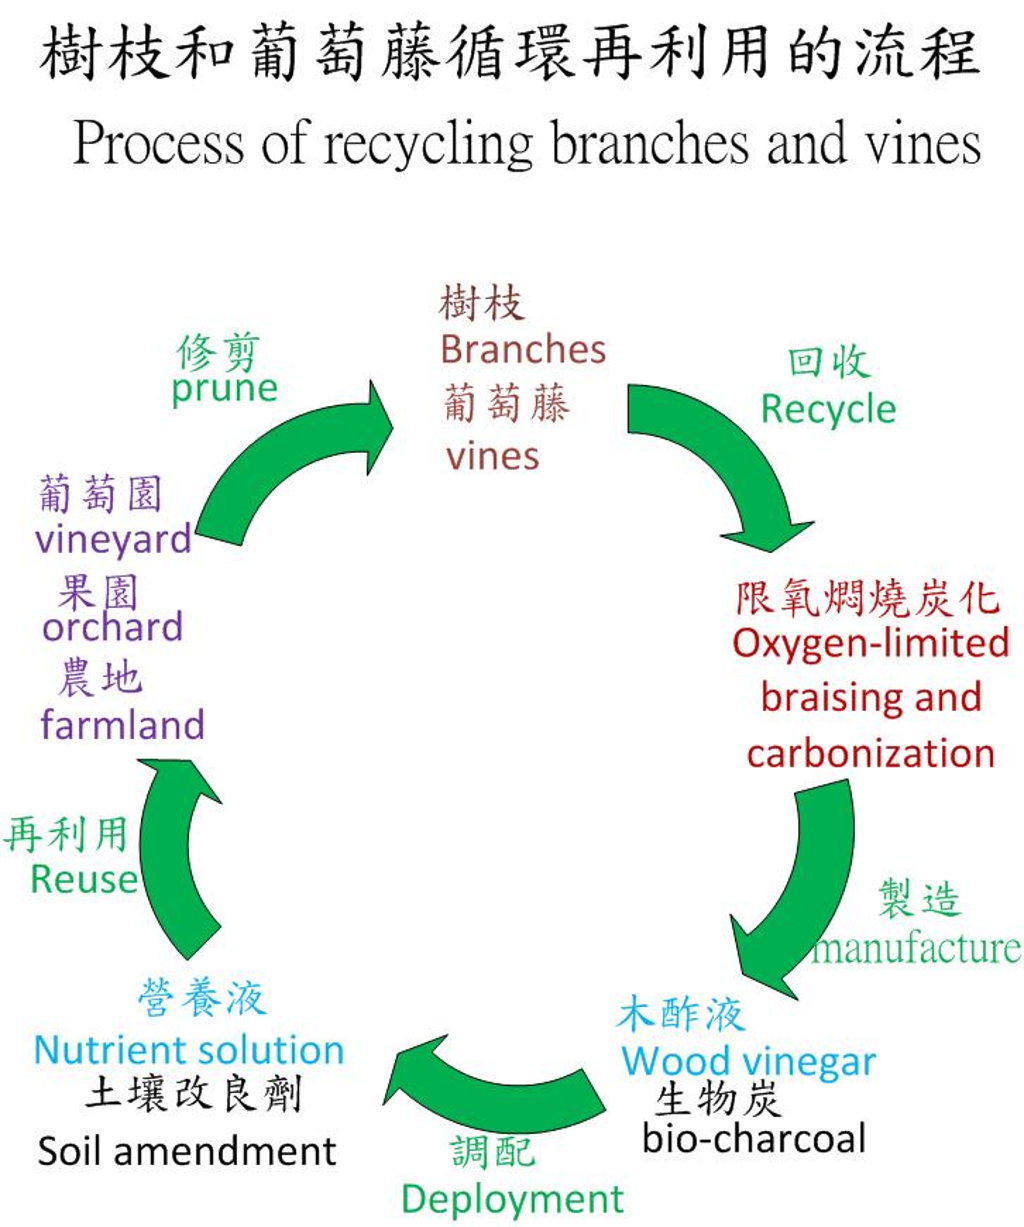 Romoting the charcoal recycling of branches and vines in Taiwan